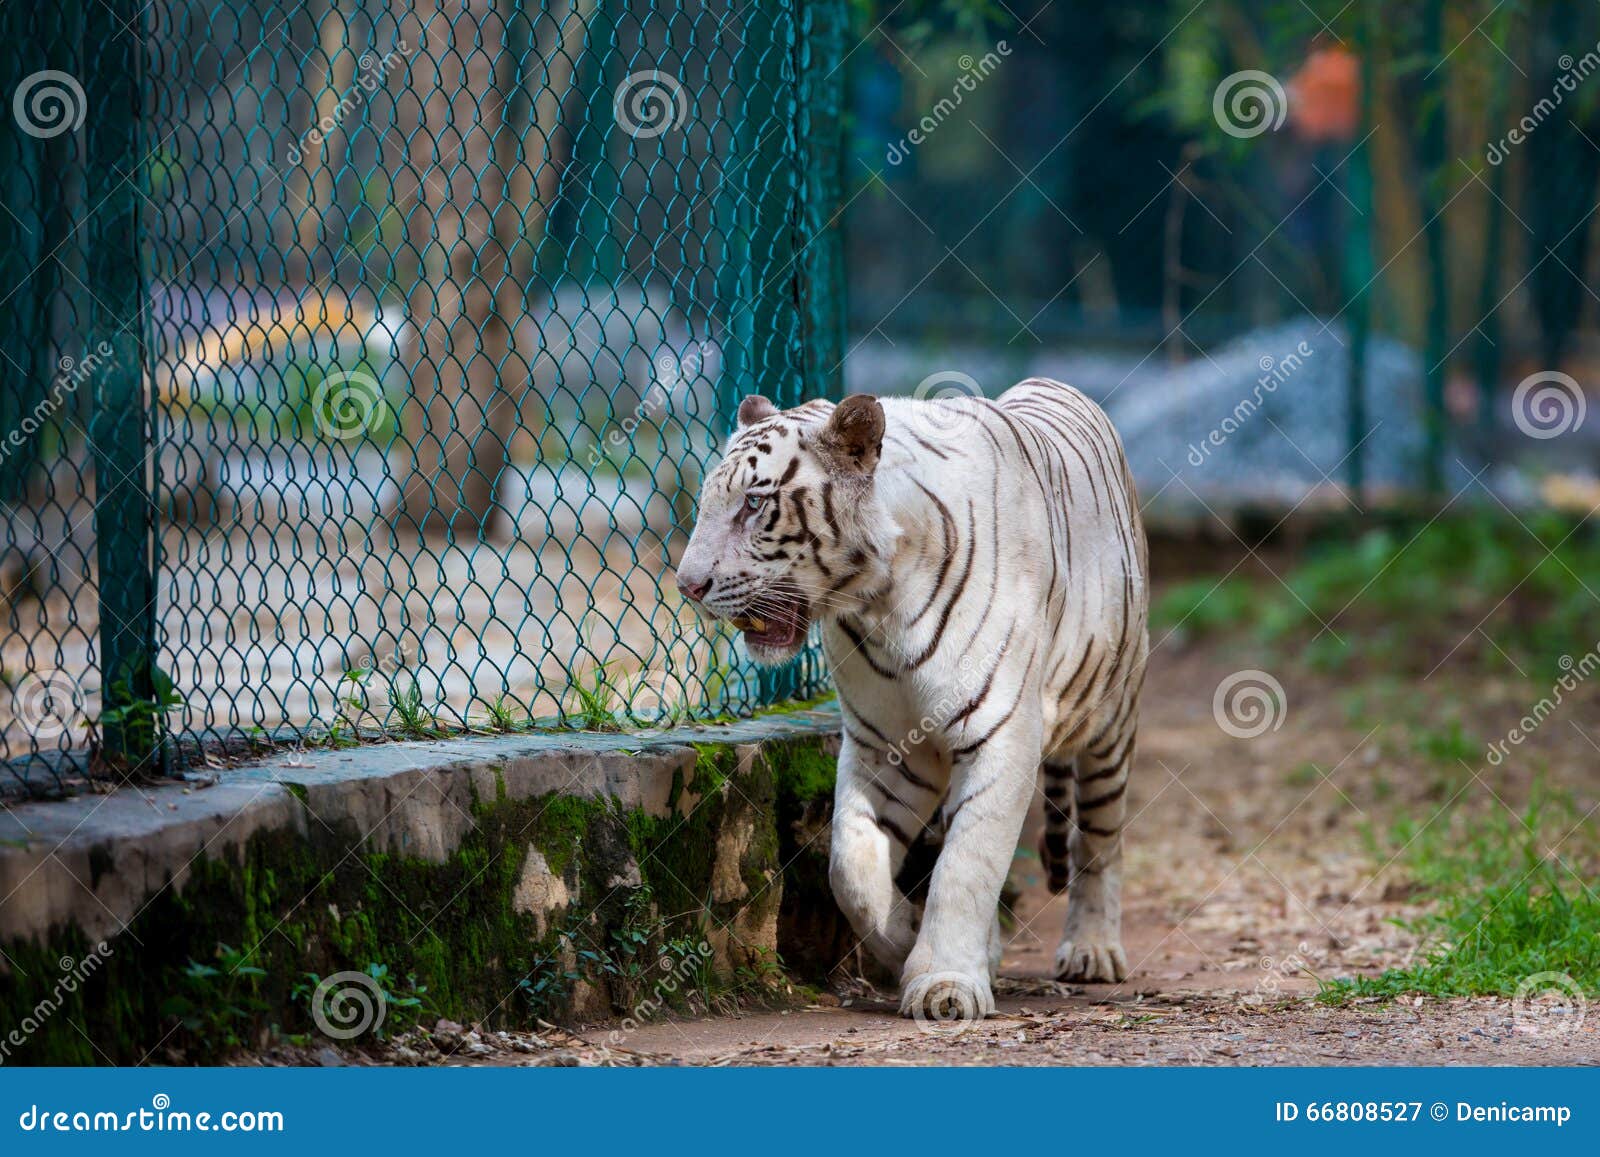 Rare White Tiger roaming wild. Tiger resting in a national park in India. These national treasures are now being protected, but due to urban growth they will never be able to roam India as they used to.